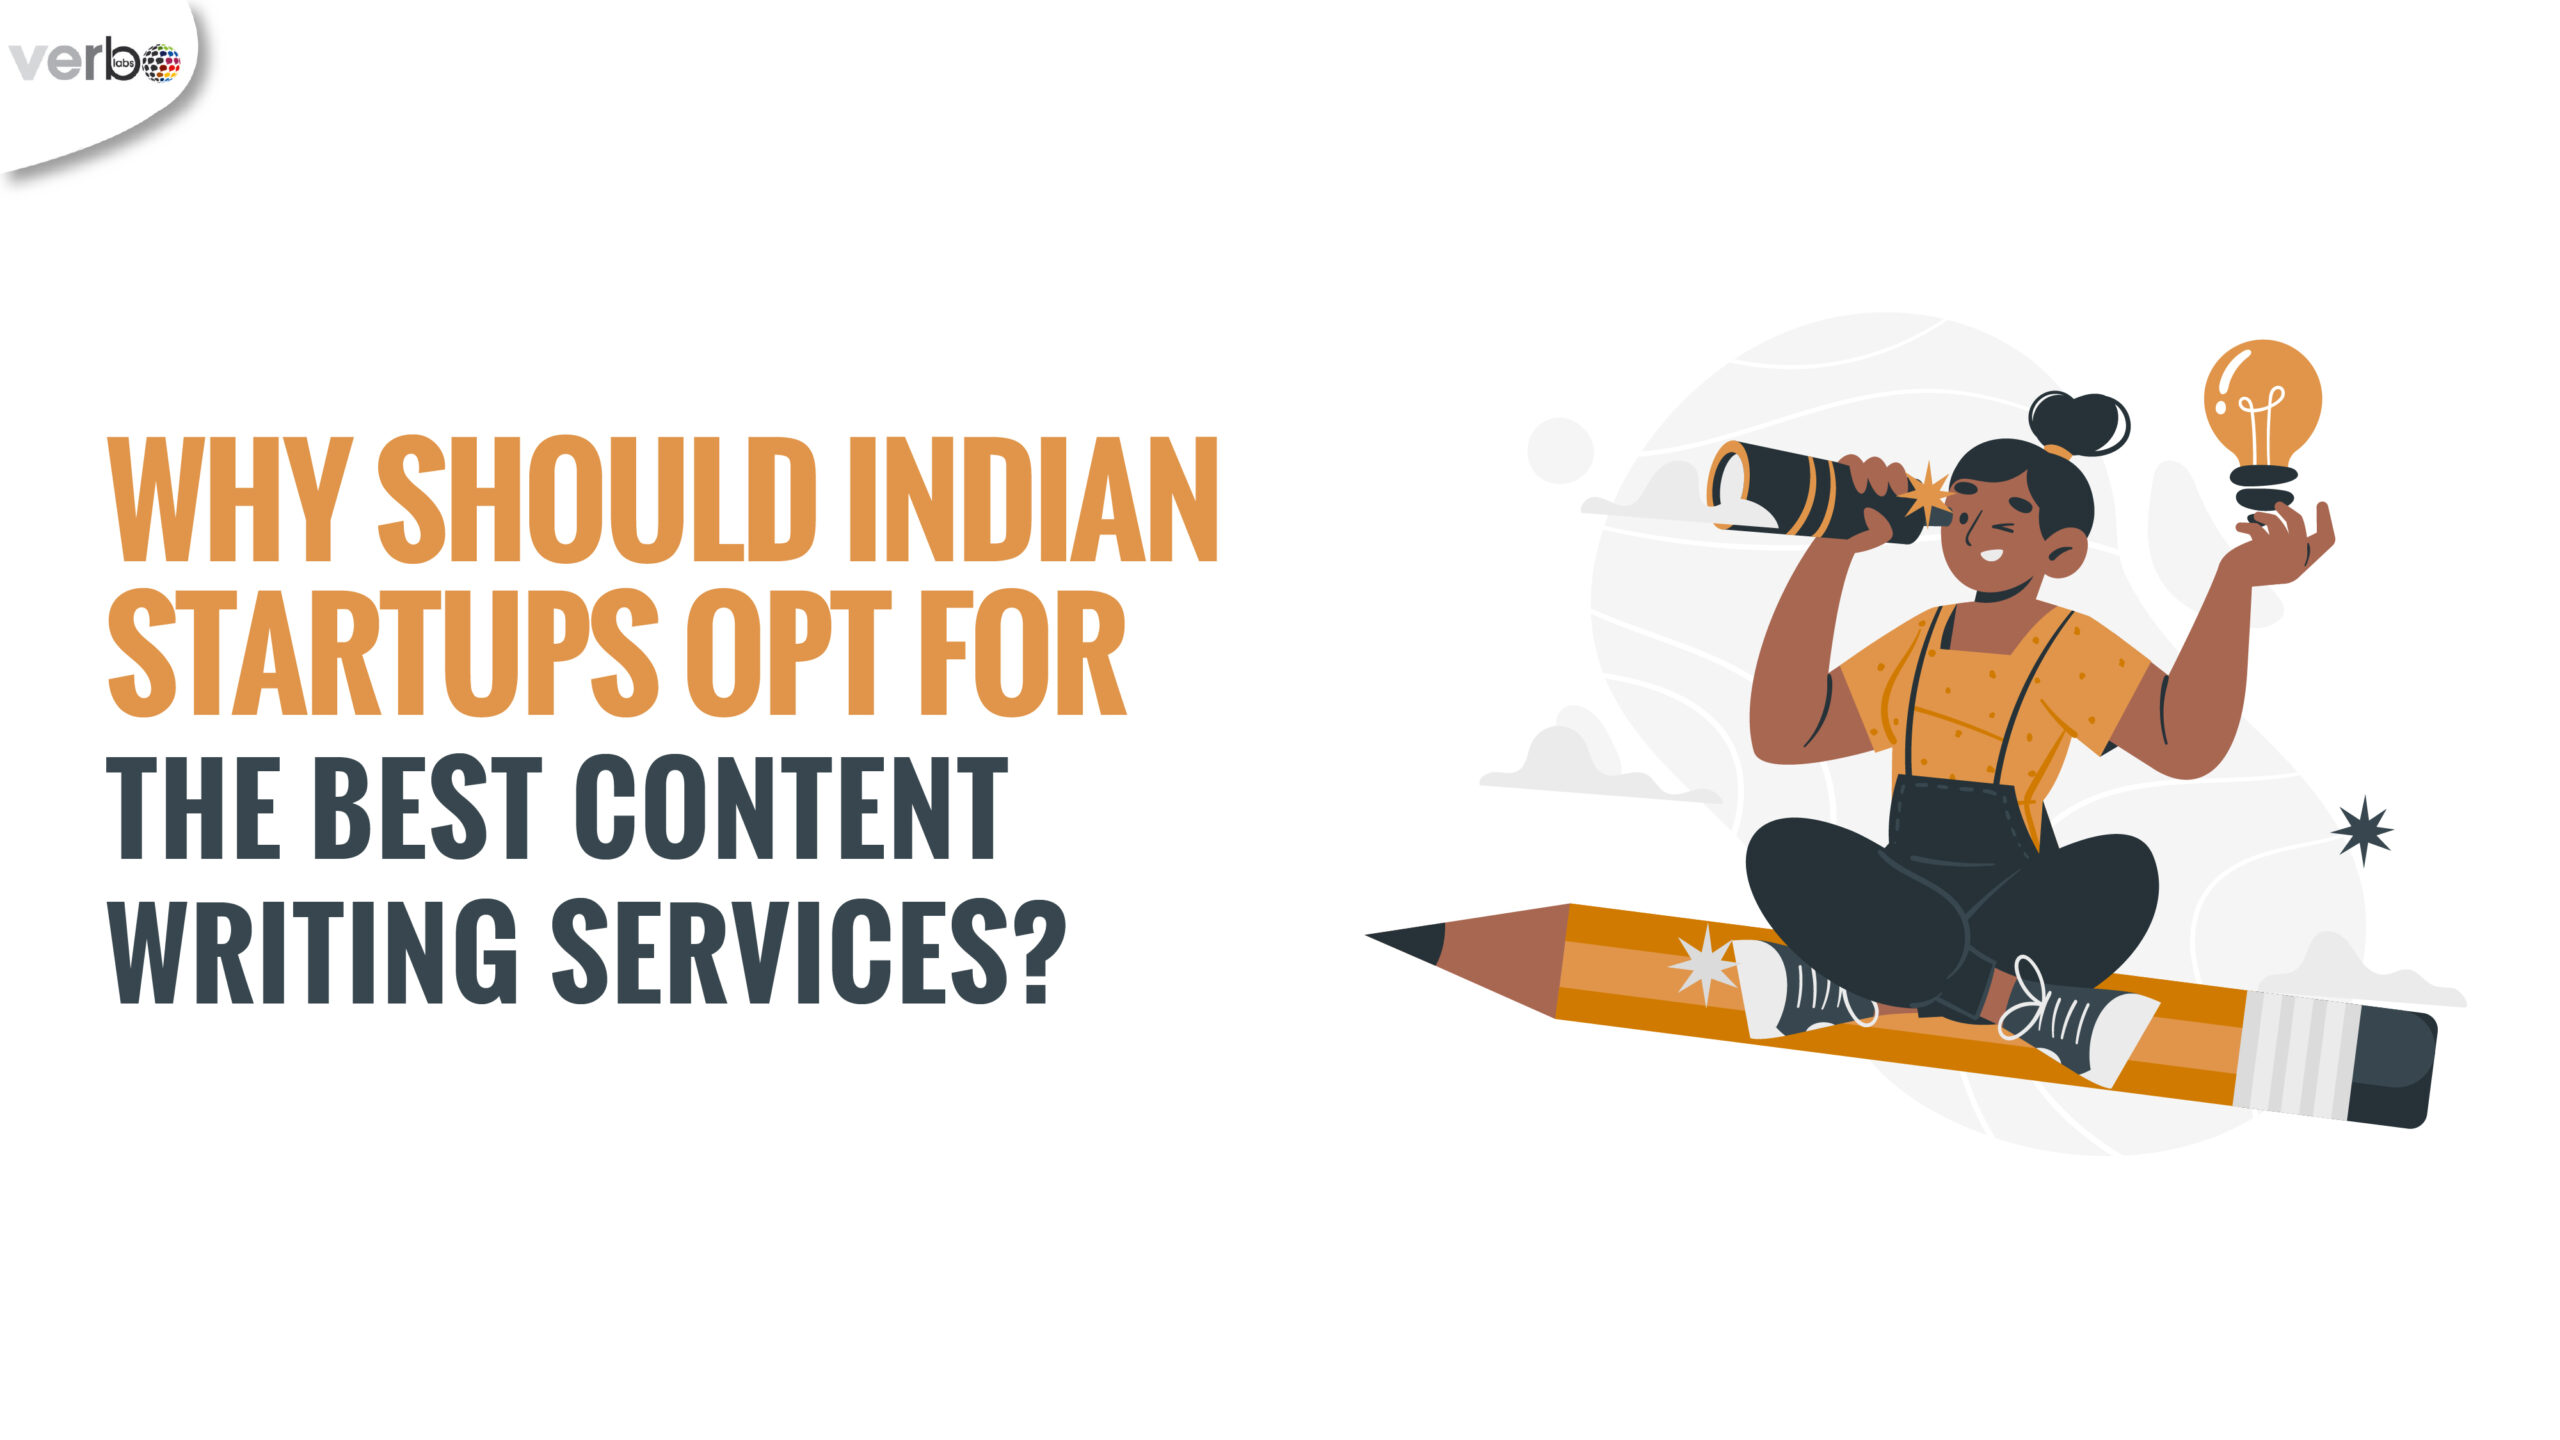 Why should Indian startups opt for the best content writing services?